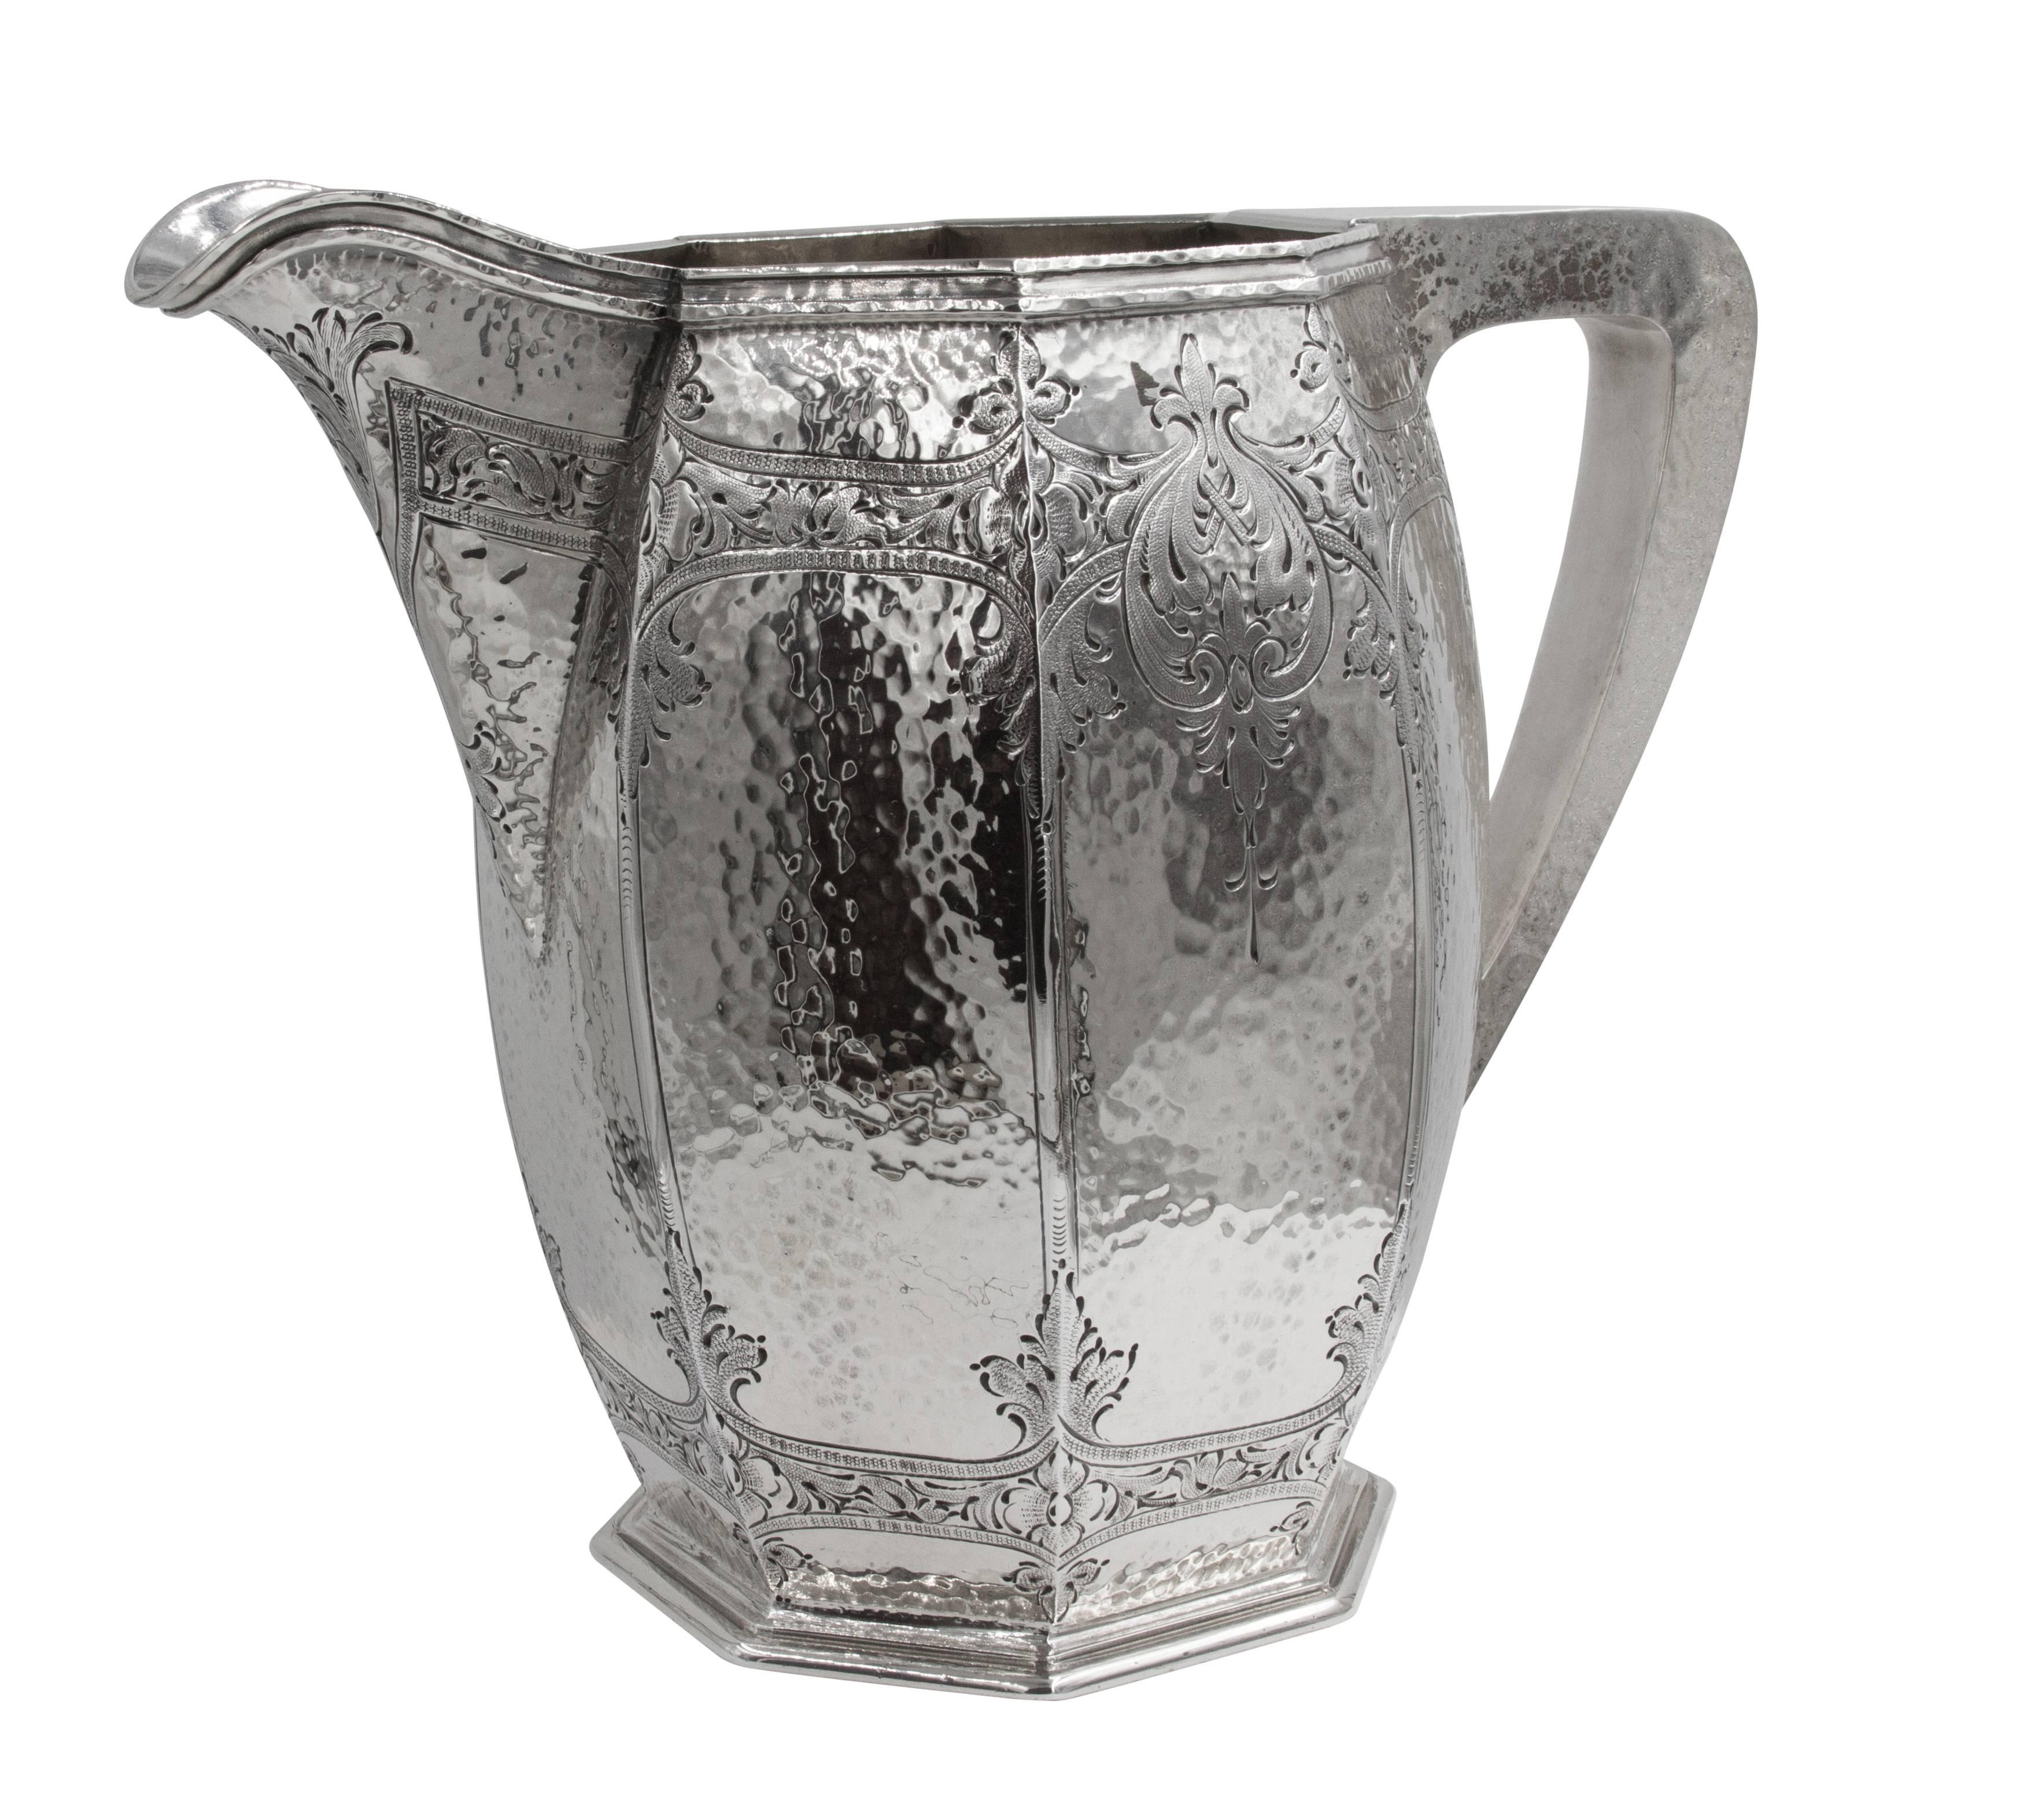 This hammered water pitcher is modern and yet has a traditional quality to it. Modern in shape and texture (hammered) this piece has pretty etching around both the top and bottom, giving it a softer delicate feel. Unlike most water pitchers that are